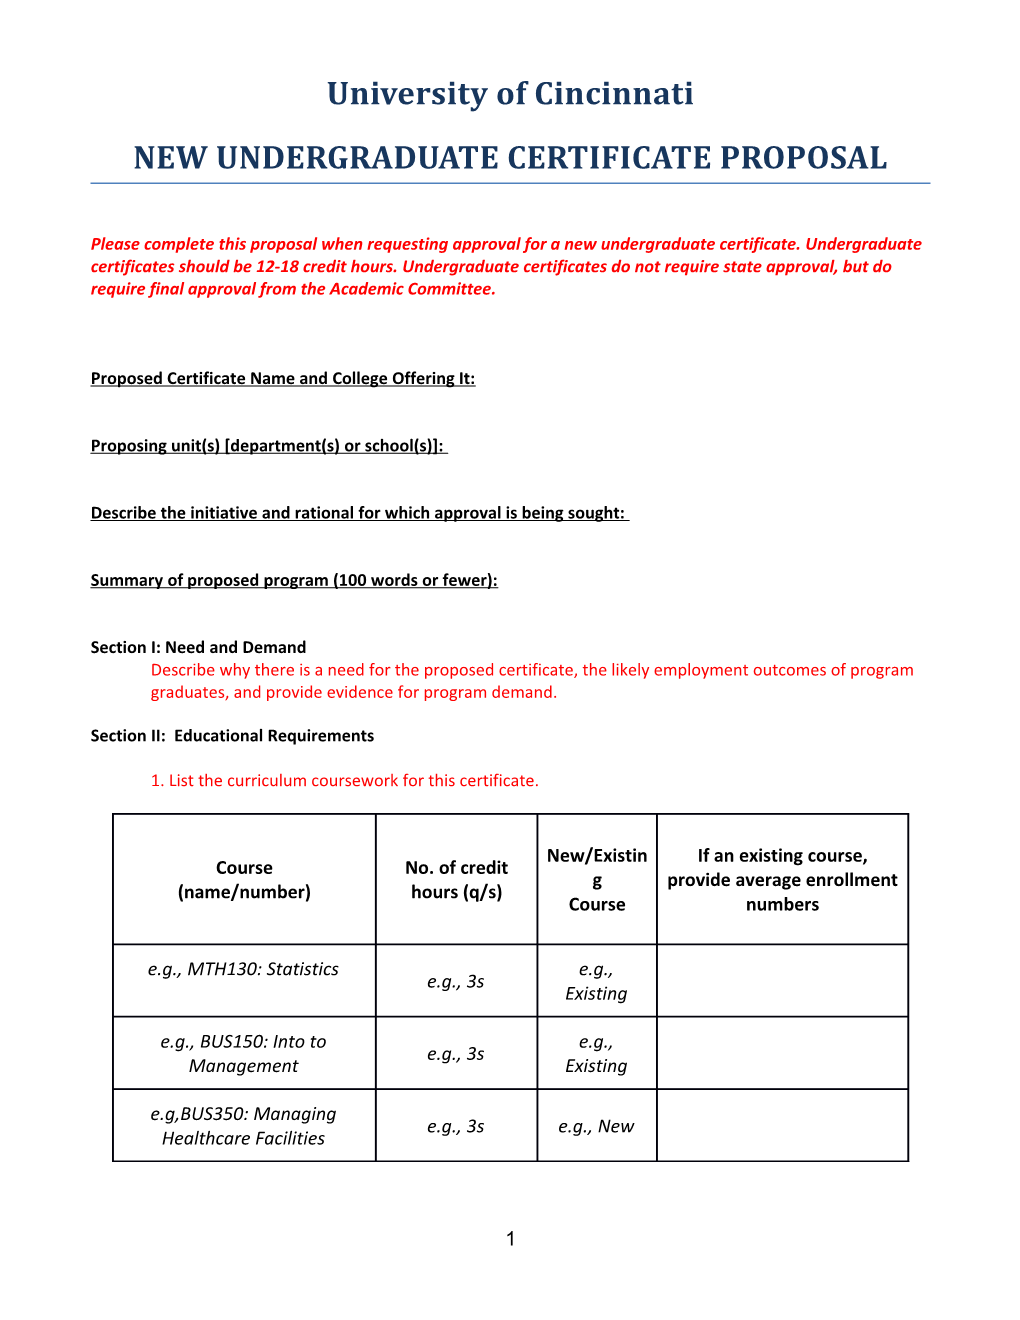 Proposed Certificate Name and College Offering It